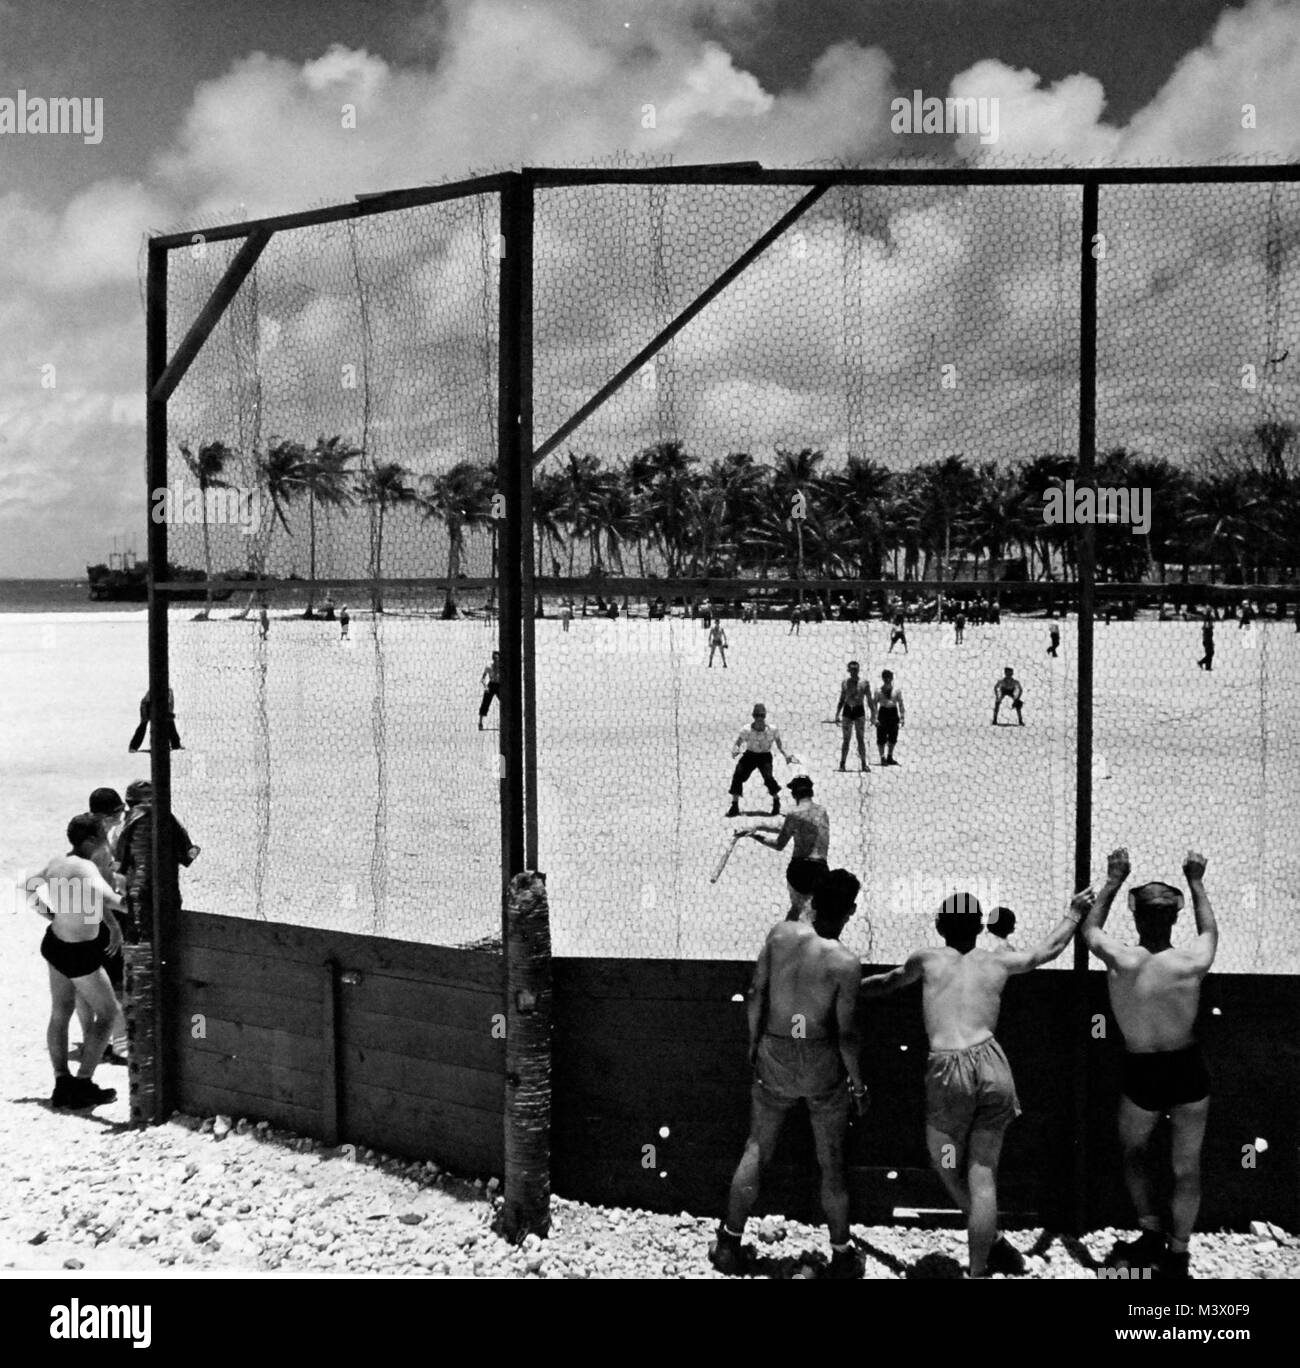 80-G-412960:  Mog-Mog Island.  Enlisted men enjoy a game of baseball.  Photograph by Steichen Photographic Unit, TR-15757.  Photograph received April 7, 1950.      Official U.S. Navy Photograph, now in the collections of the National Archives.  (2018/01/31). 80-G-412960 40008539151 o Stock Photo